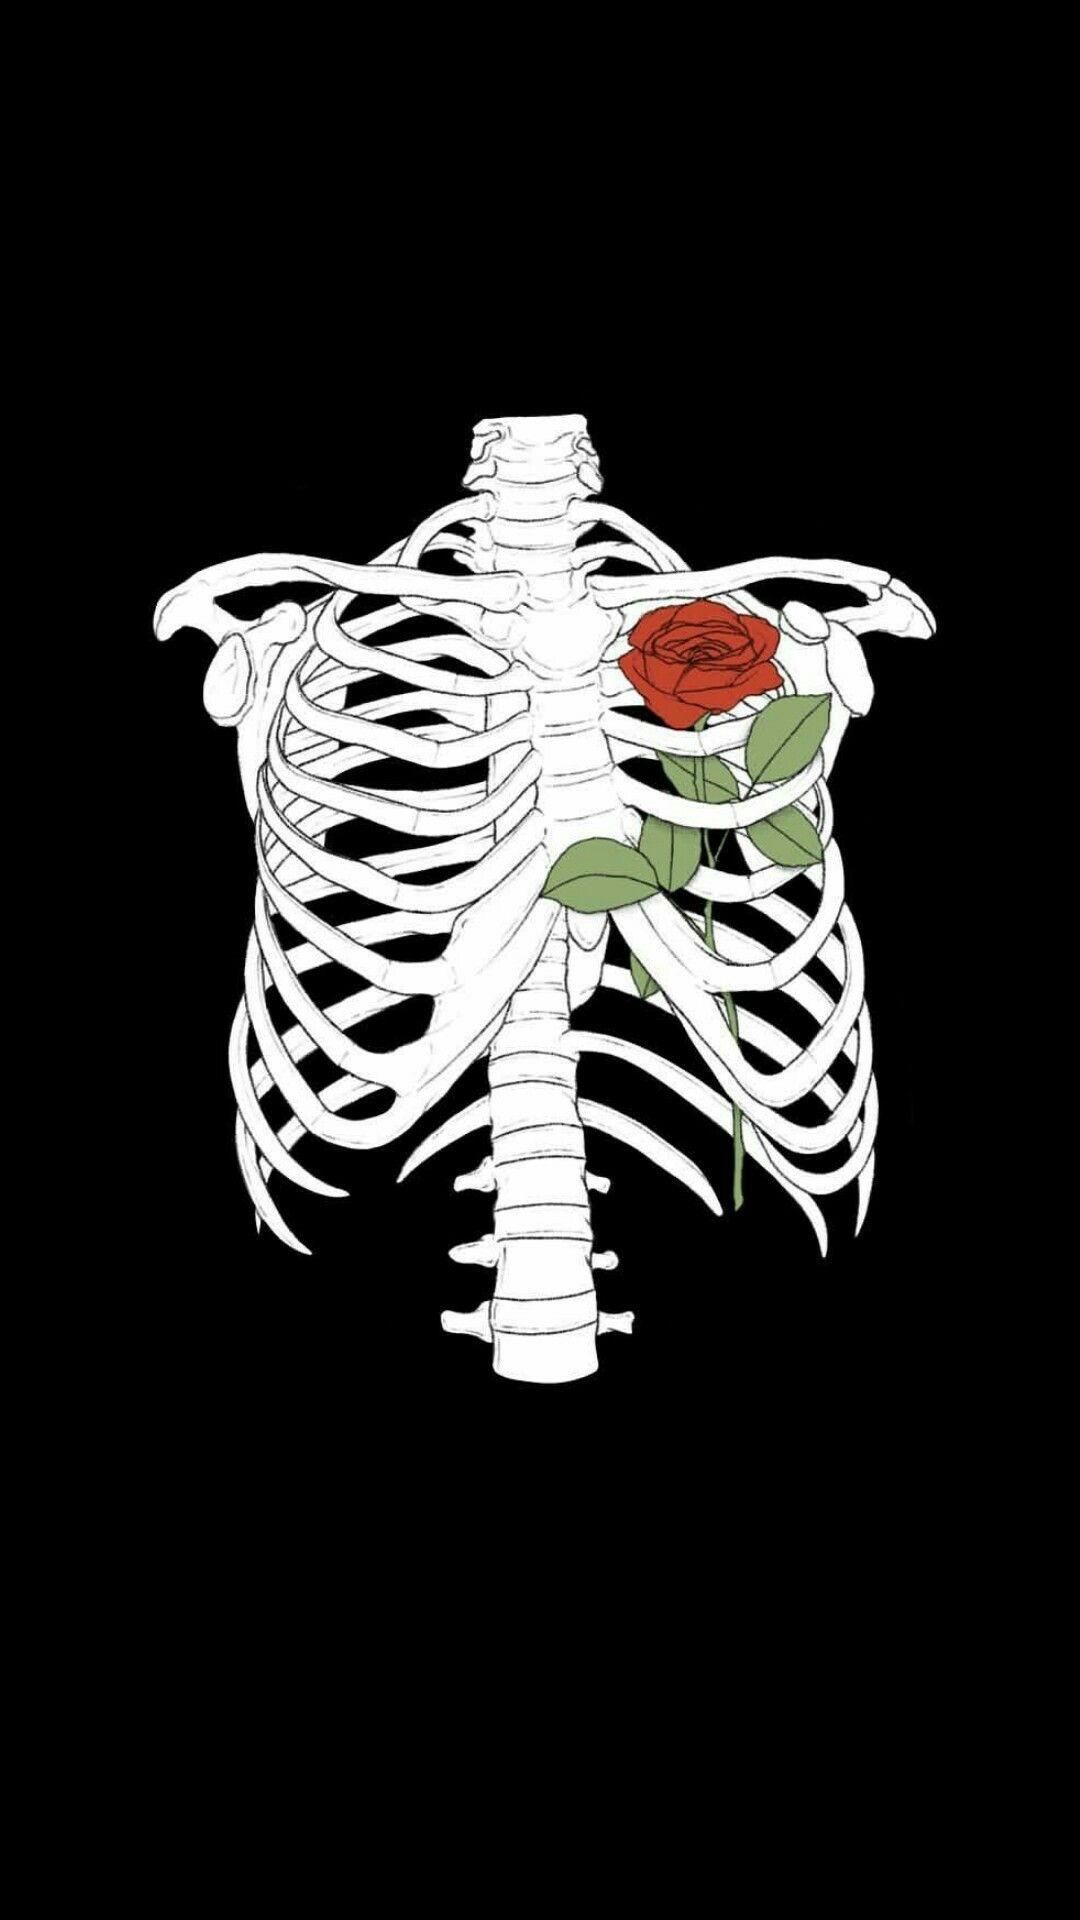 Aesthetic skeleton with a rose in its rib cage - Skeleton